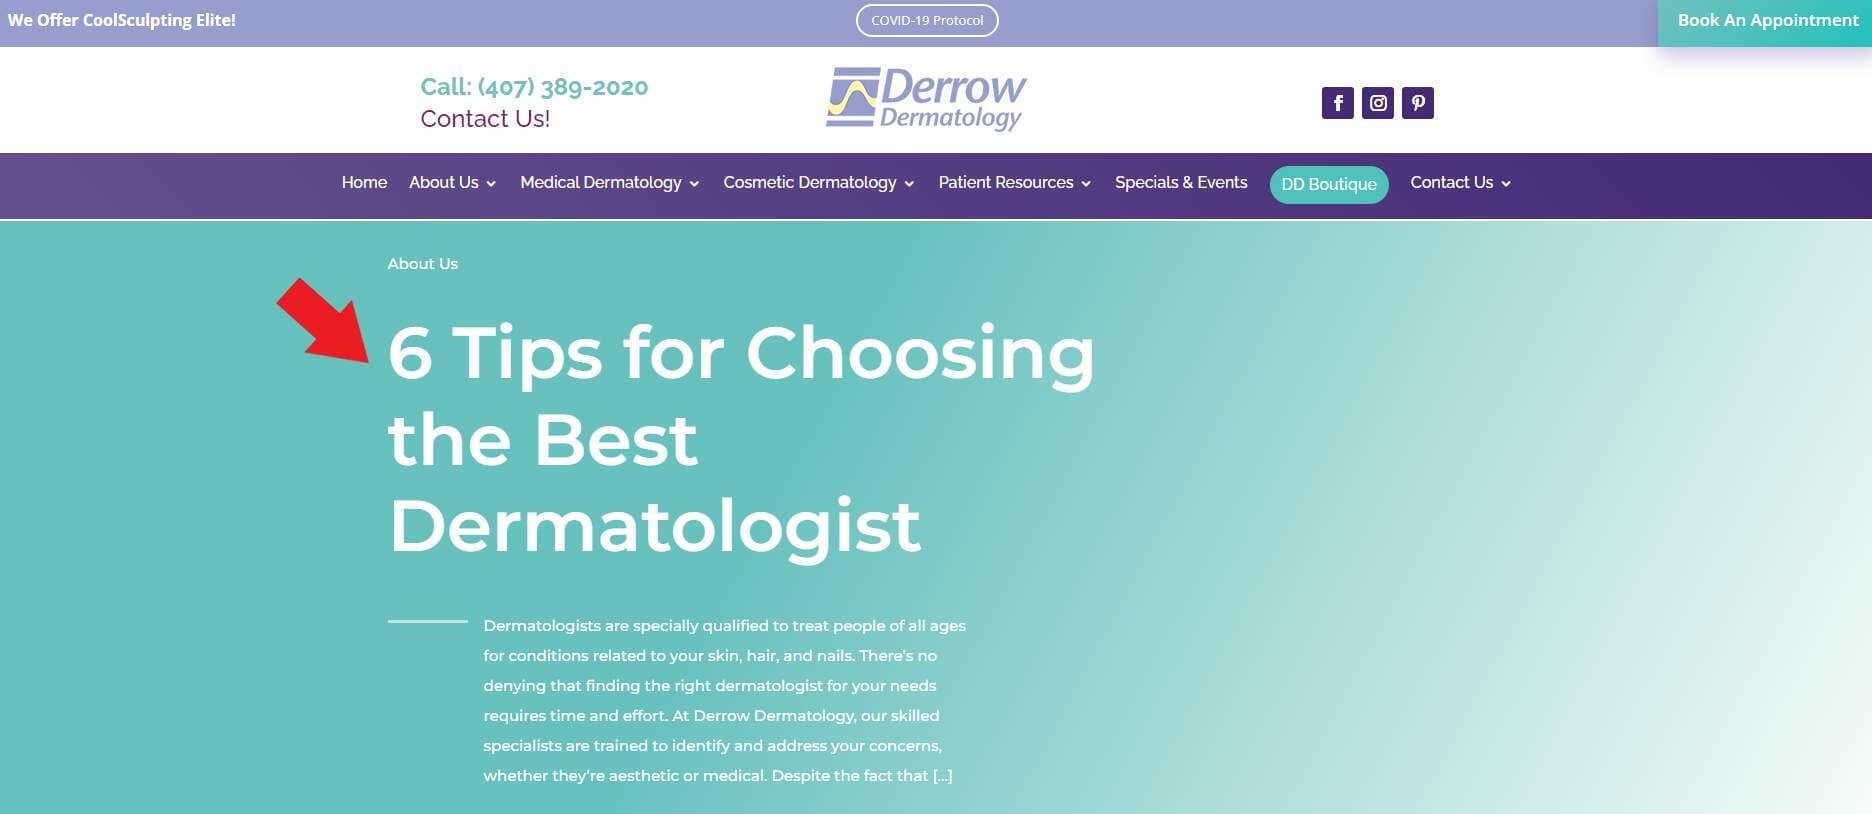 Blog on how to choose the best dermatologist